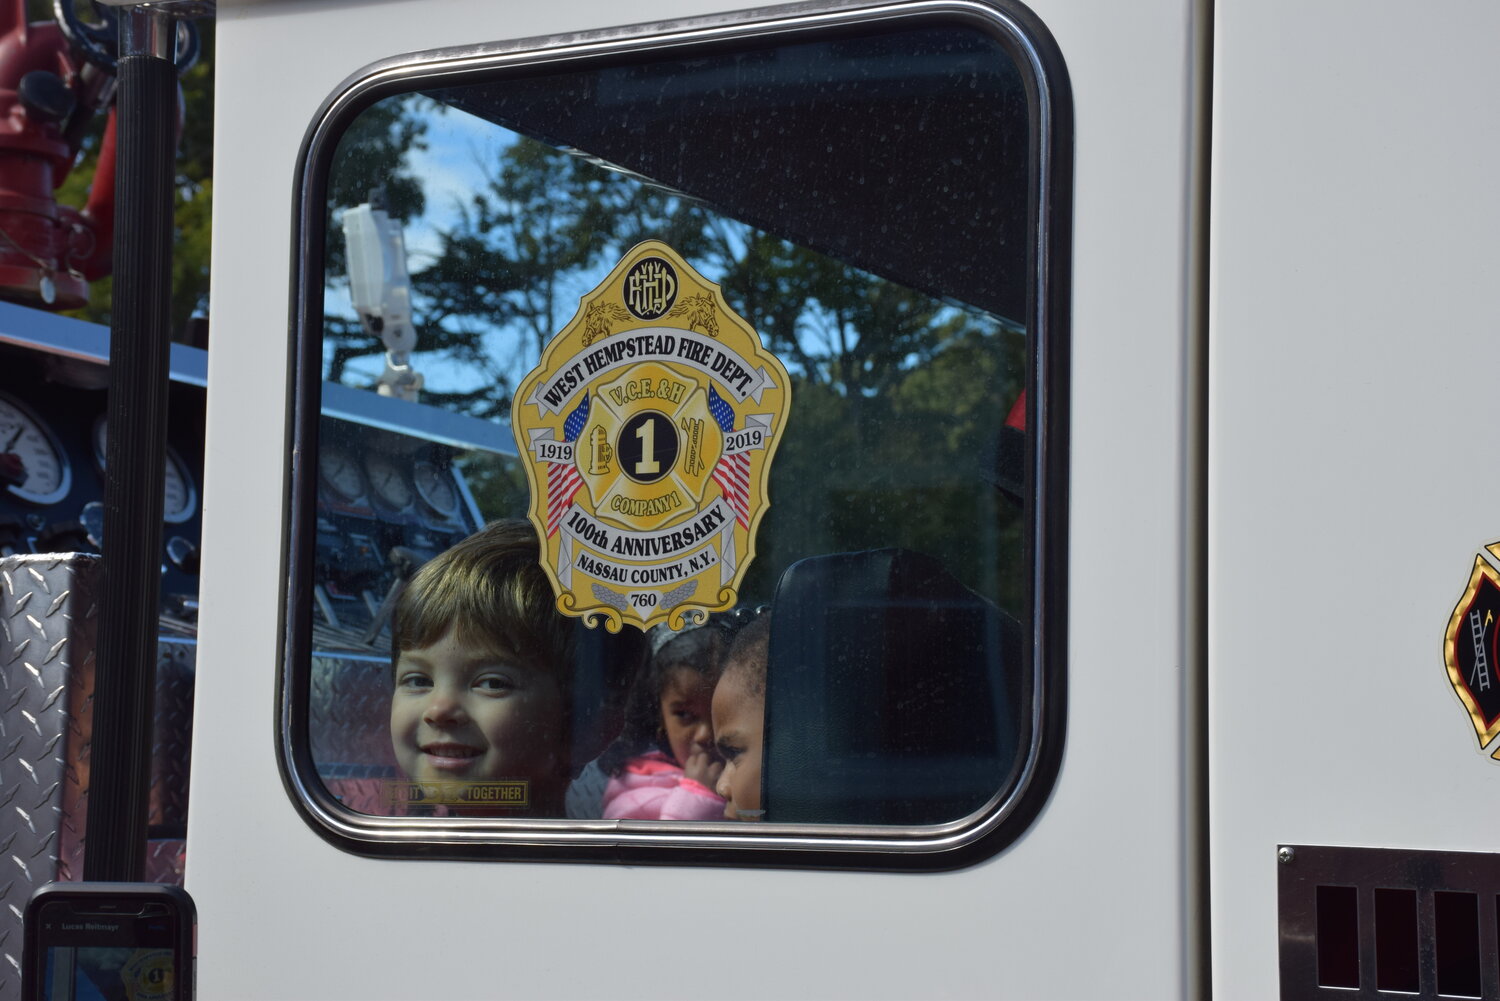 Kids learned about fire safety courtesy of the West Hempstead Fire Department for Fire Prevention Month.